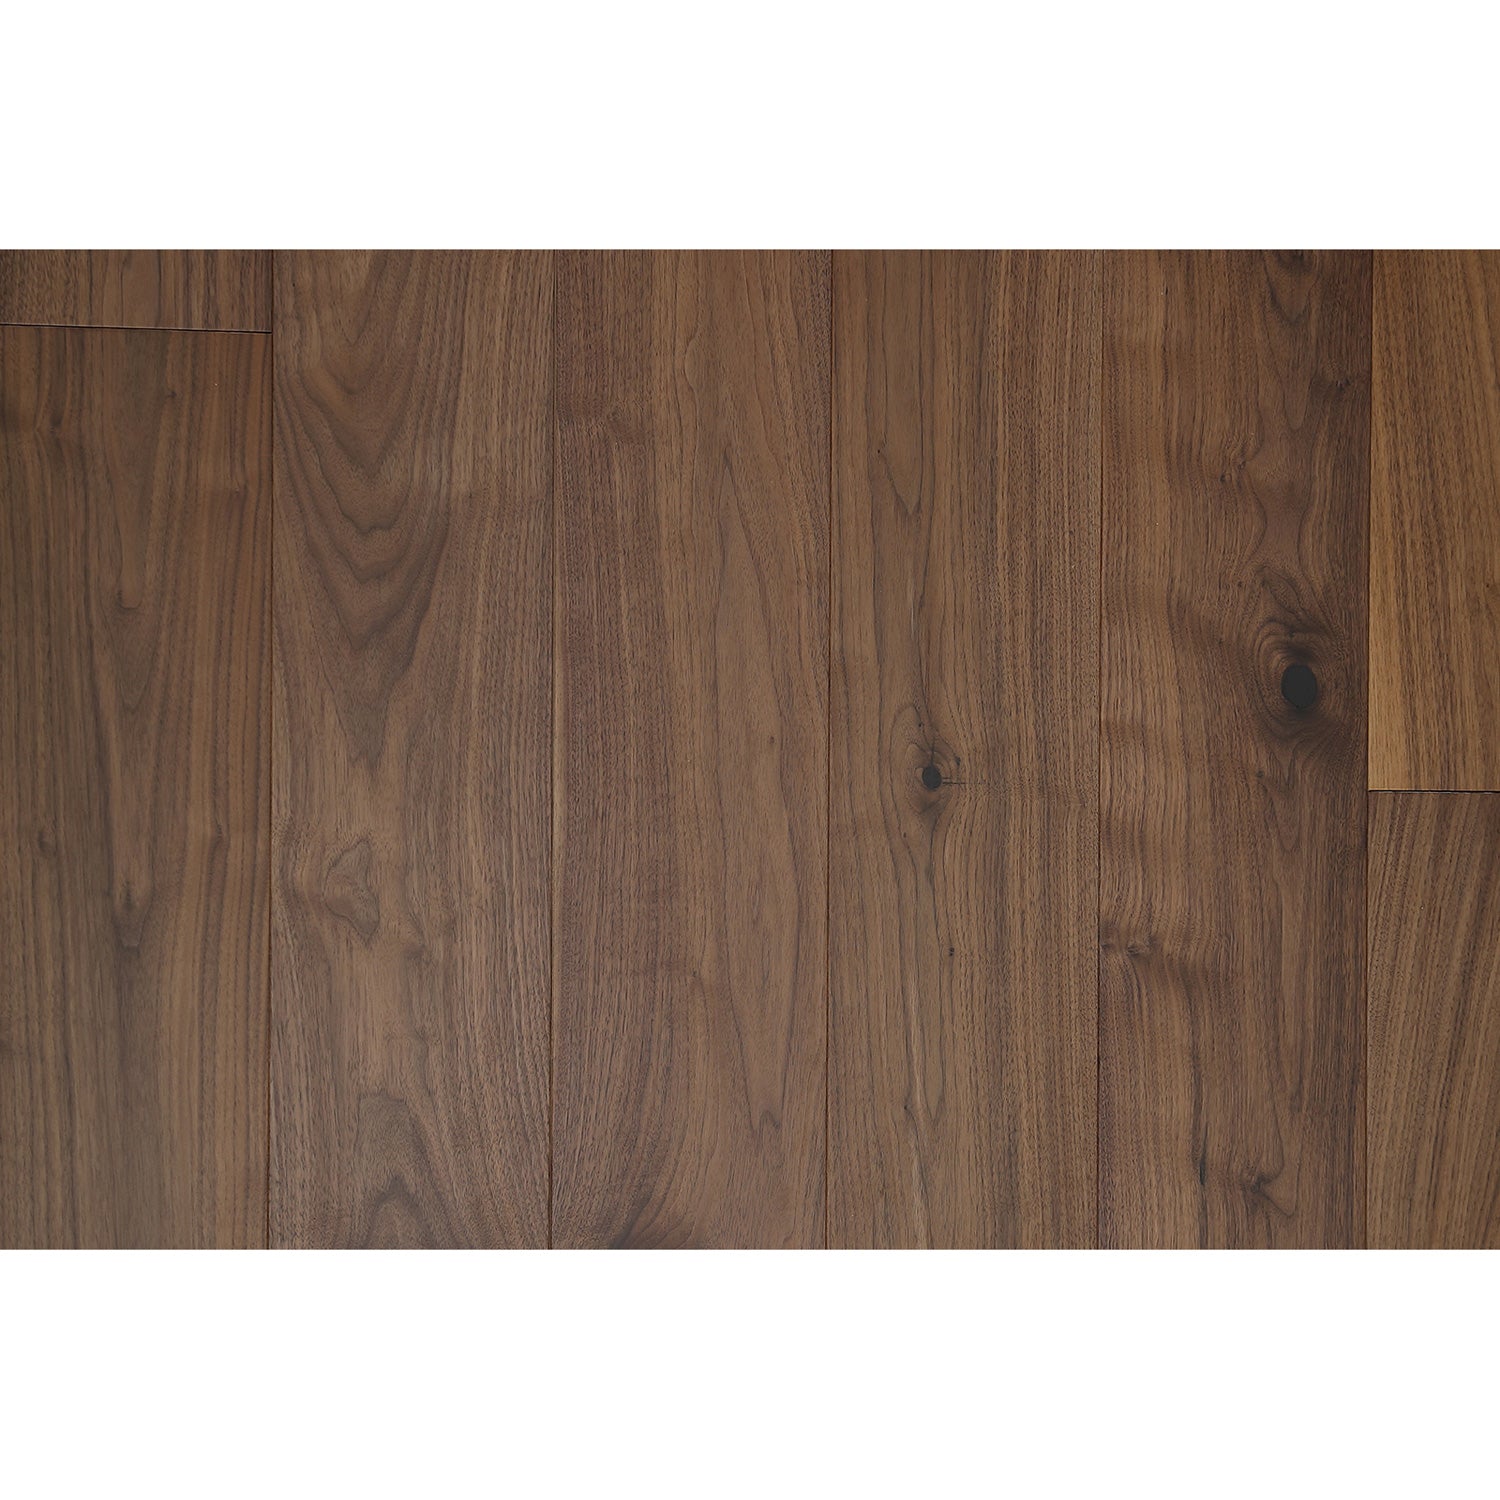 DuChateau - The Vernal Collection - American Walnut